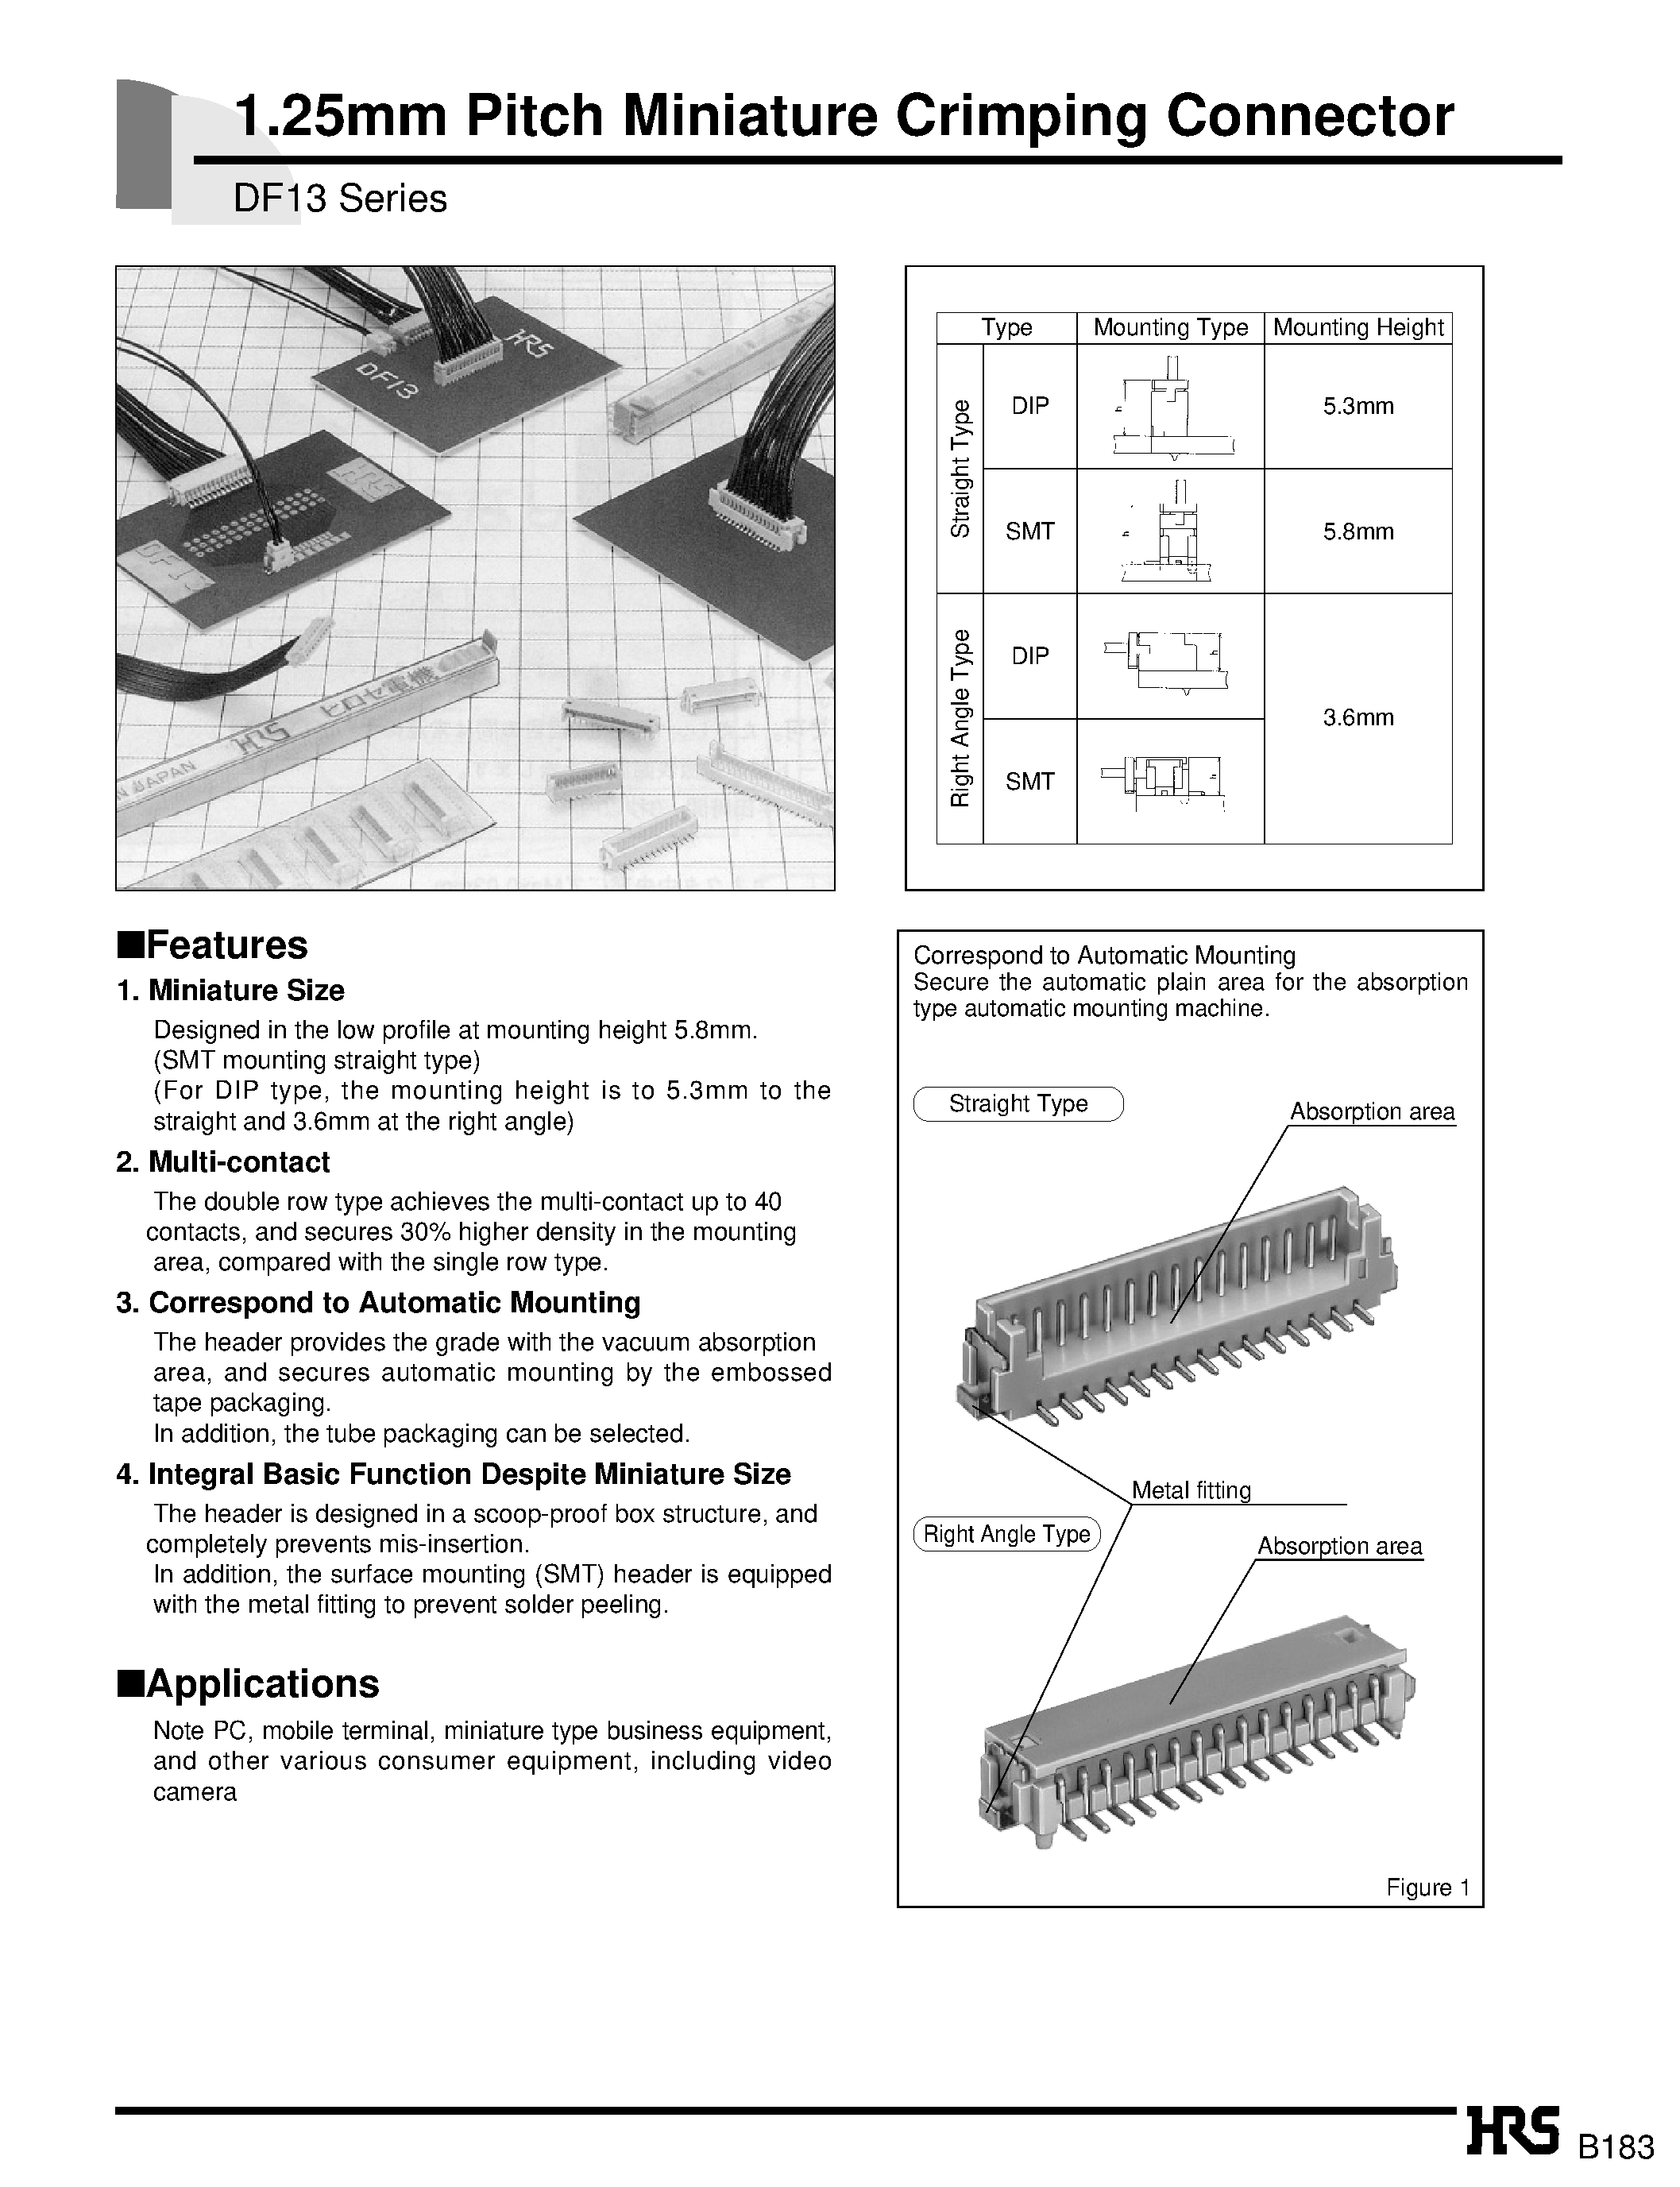 Datasheet DF13-12P-1.25V - 1.25mm Pitch Miniature Crimping Connector page 1